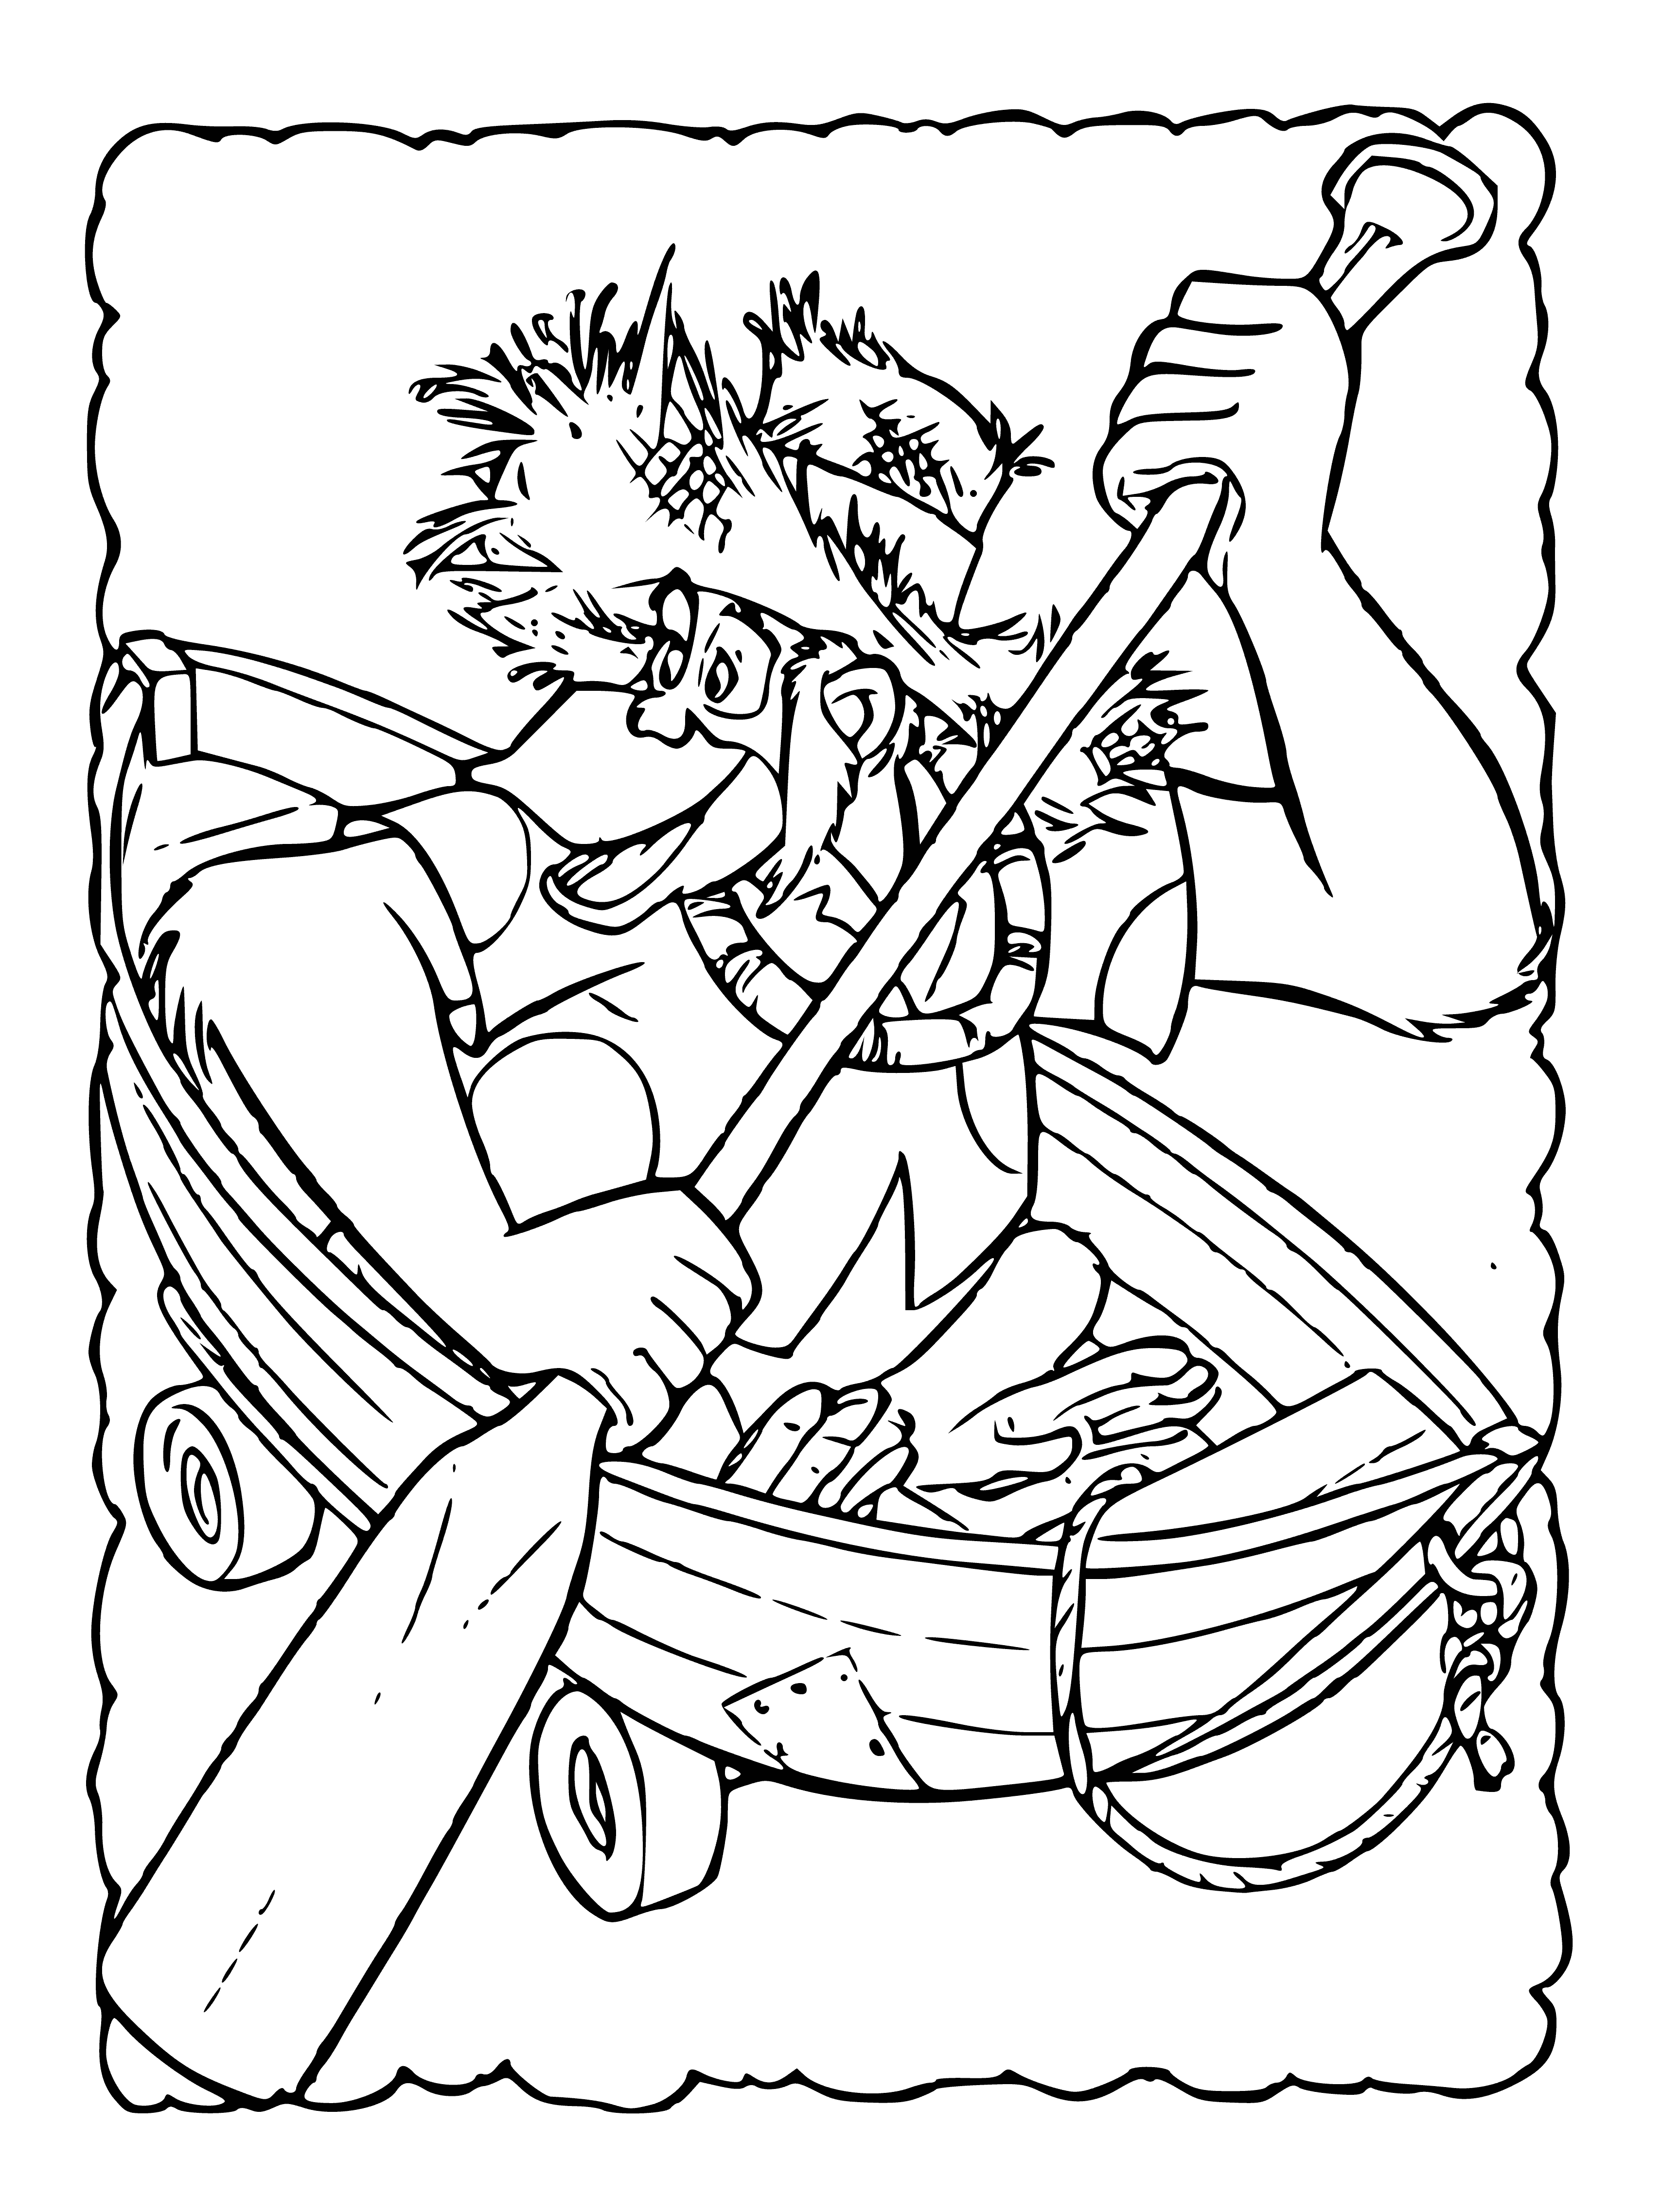 coloring page: A boat with blue and white stripes and a box holds a stuffed animal wearing a blue and white striped shirt with a pocket containing a yellow and green ball with a blue star.